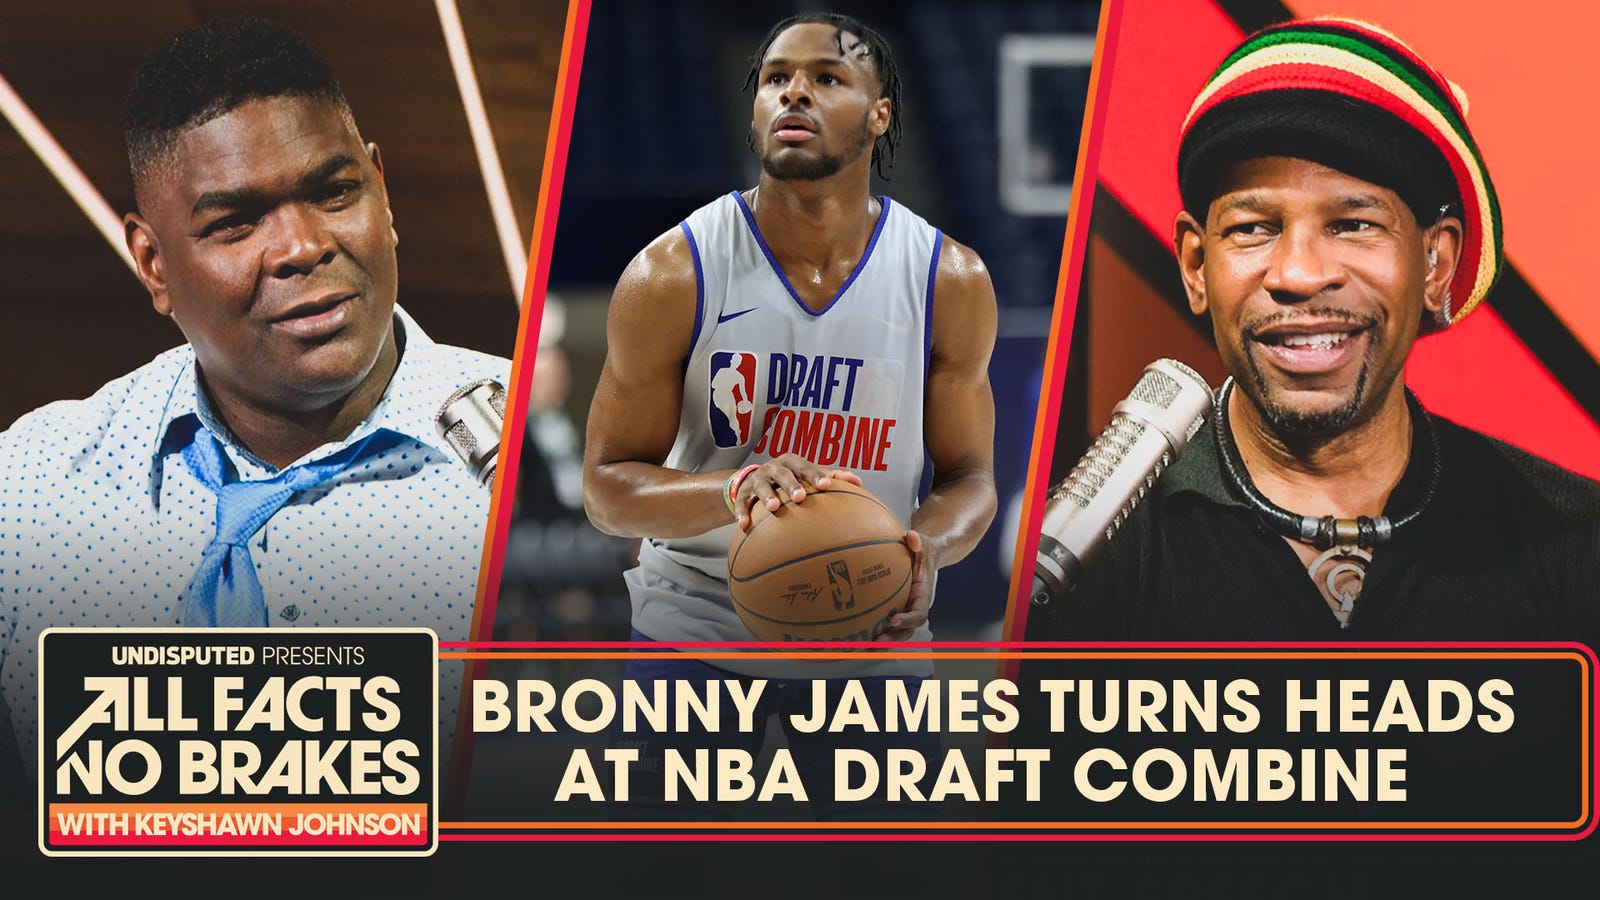 Bronny James turns heads at NBA Draft combine. Will he prove haters wrong? 